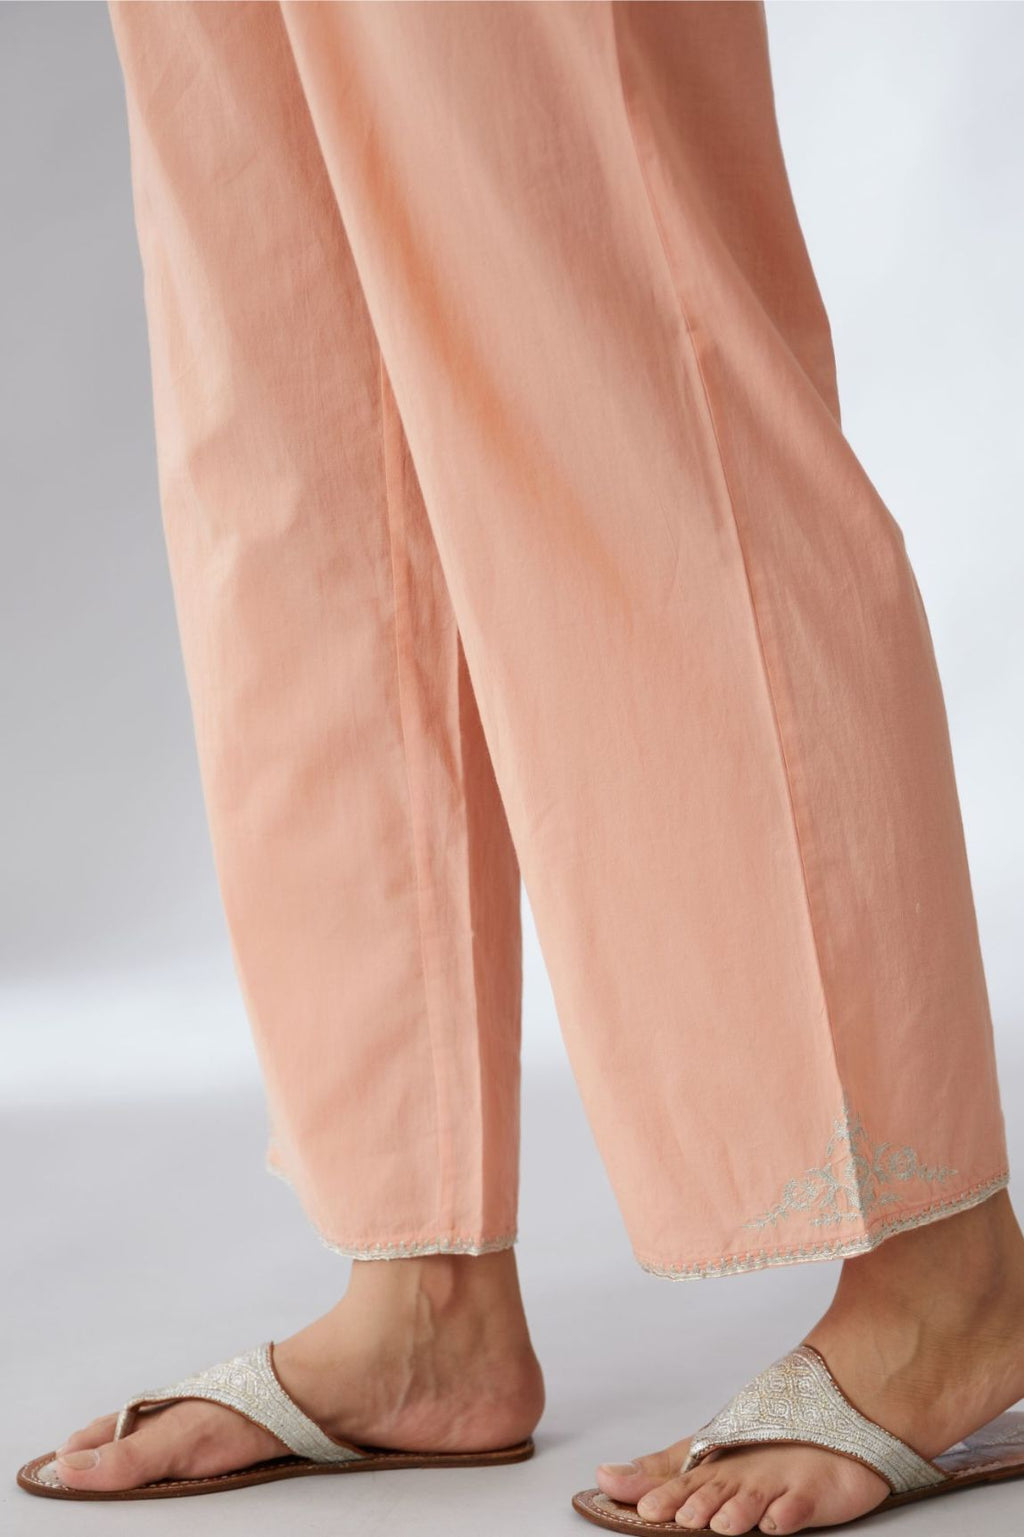 Peach cotton straight pants with silver embroidery detailing at bottom hem (Pants)